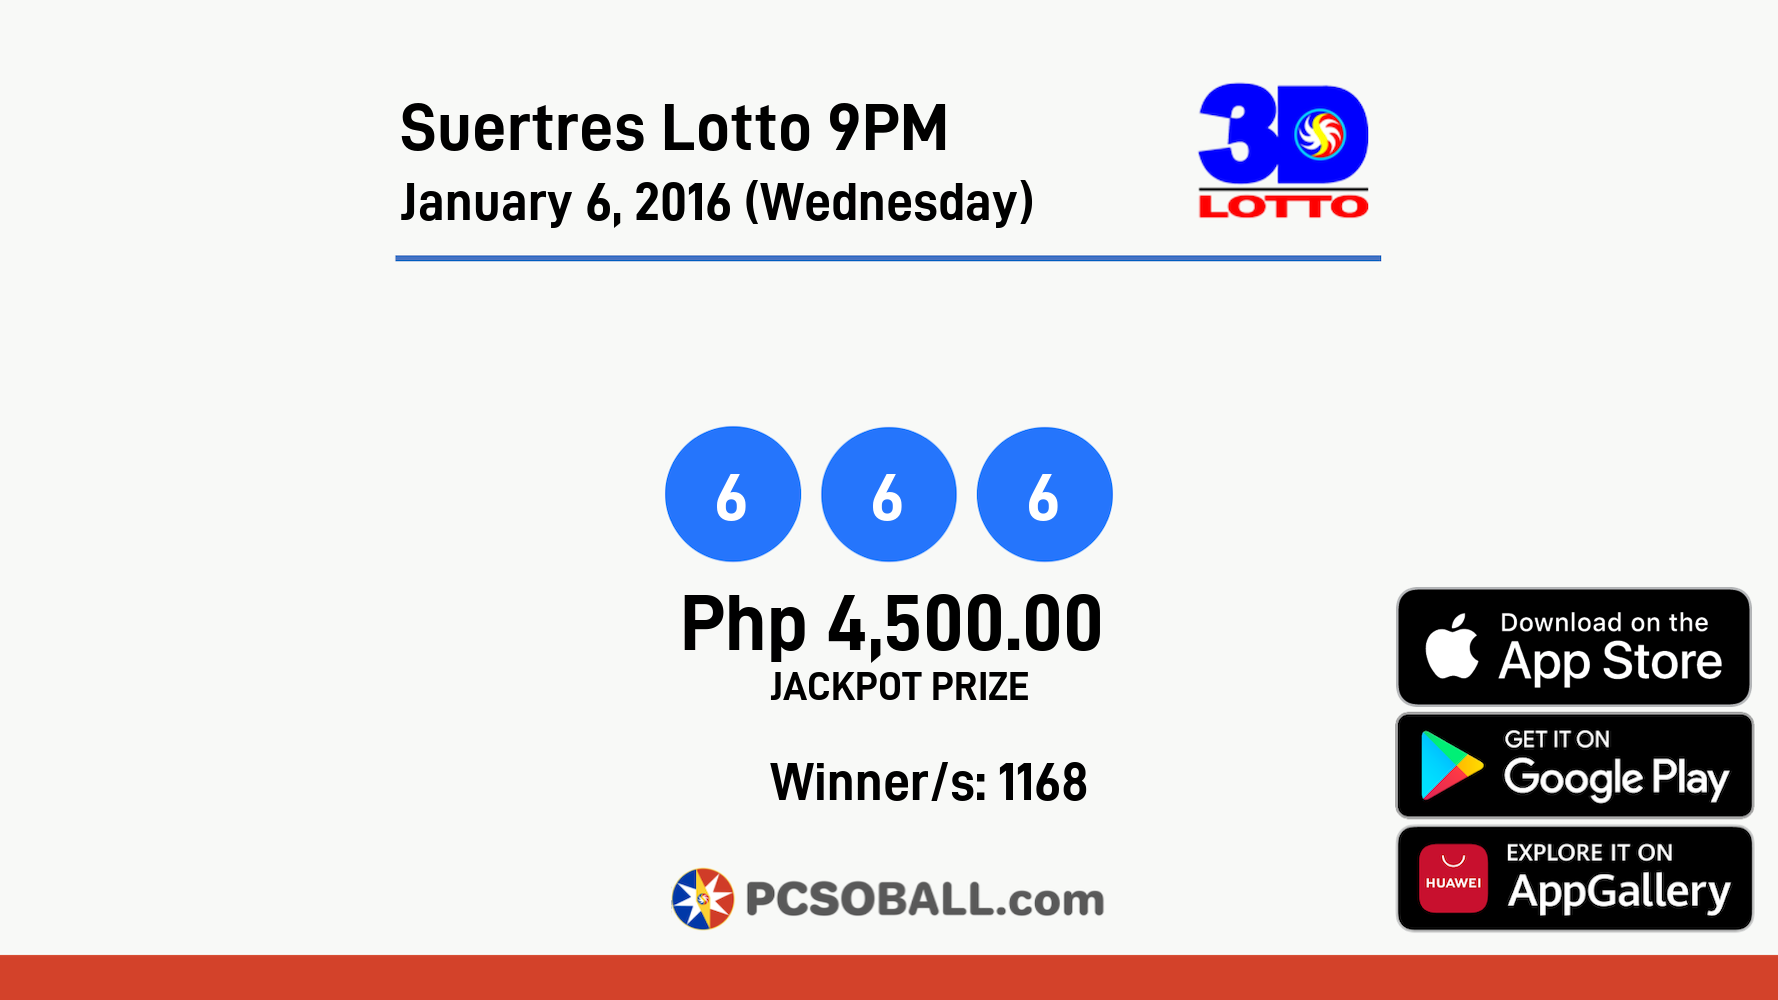 Suertres Lotto 9PM January 6, 2016 (Wednesday) Result